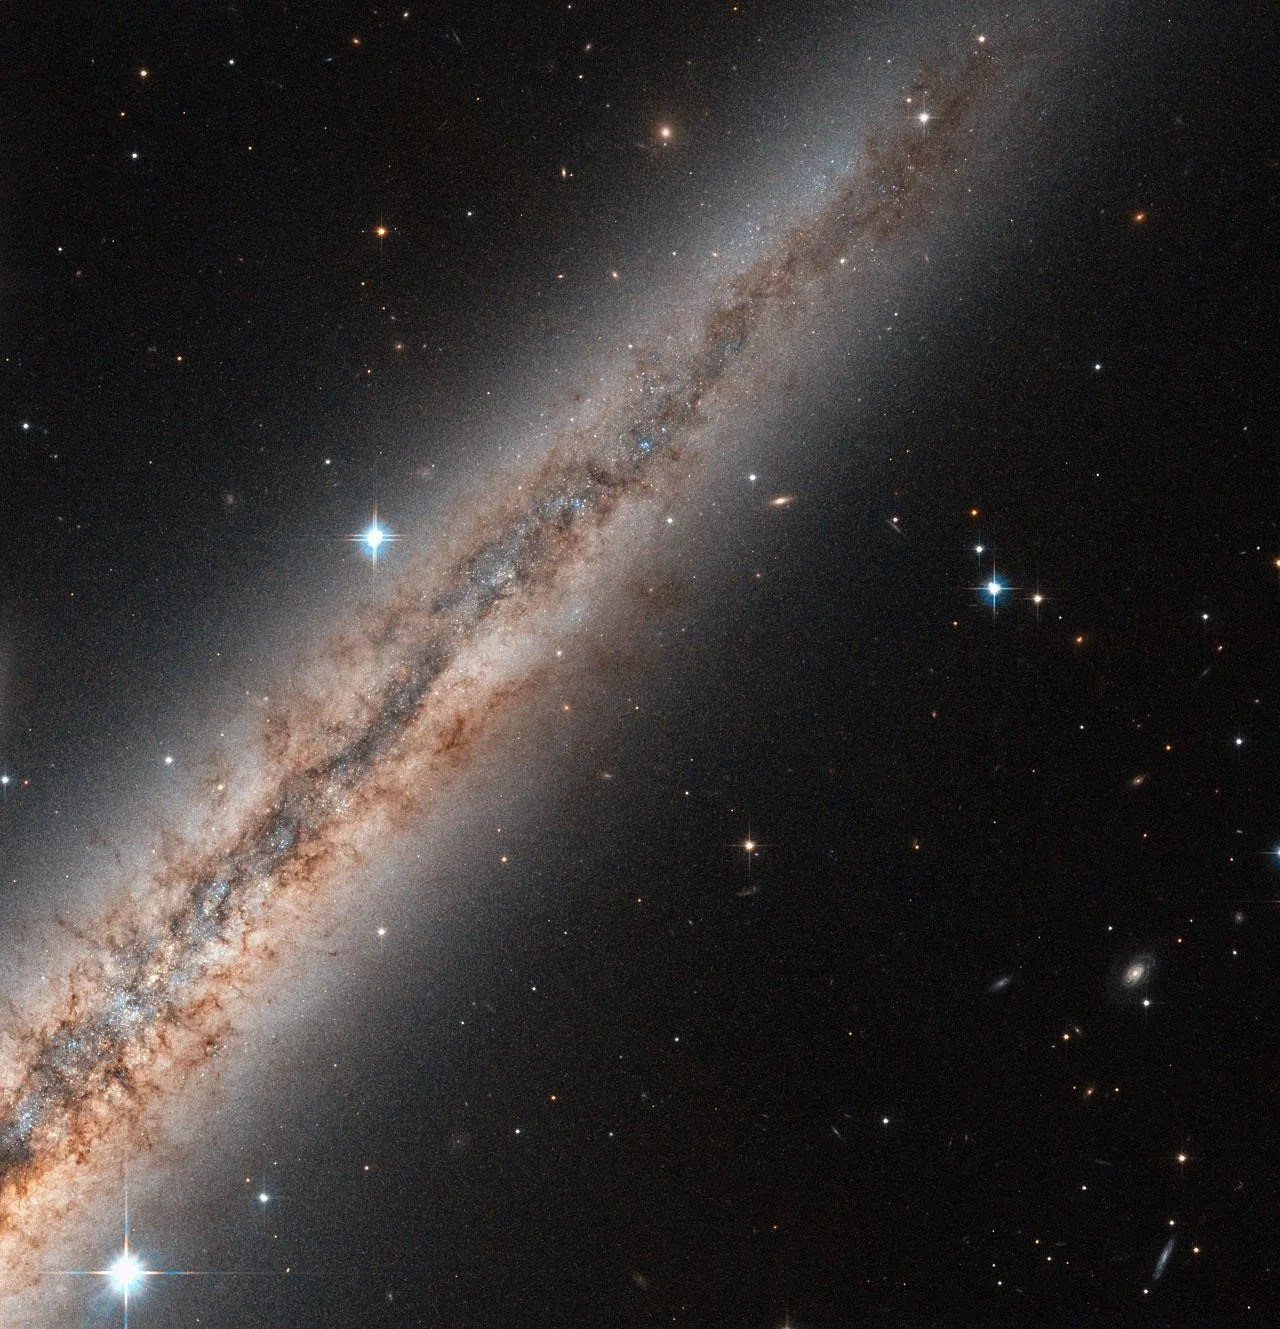 Thin line of stars and dust and gas, the side view of a galaxy. This galaxy is diagonal across the image, with the blackness of space behind it.